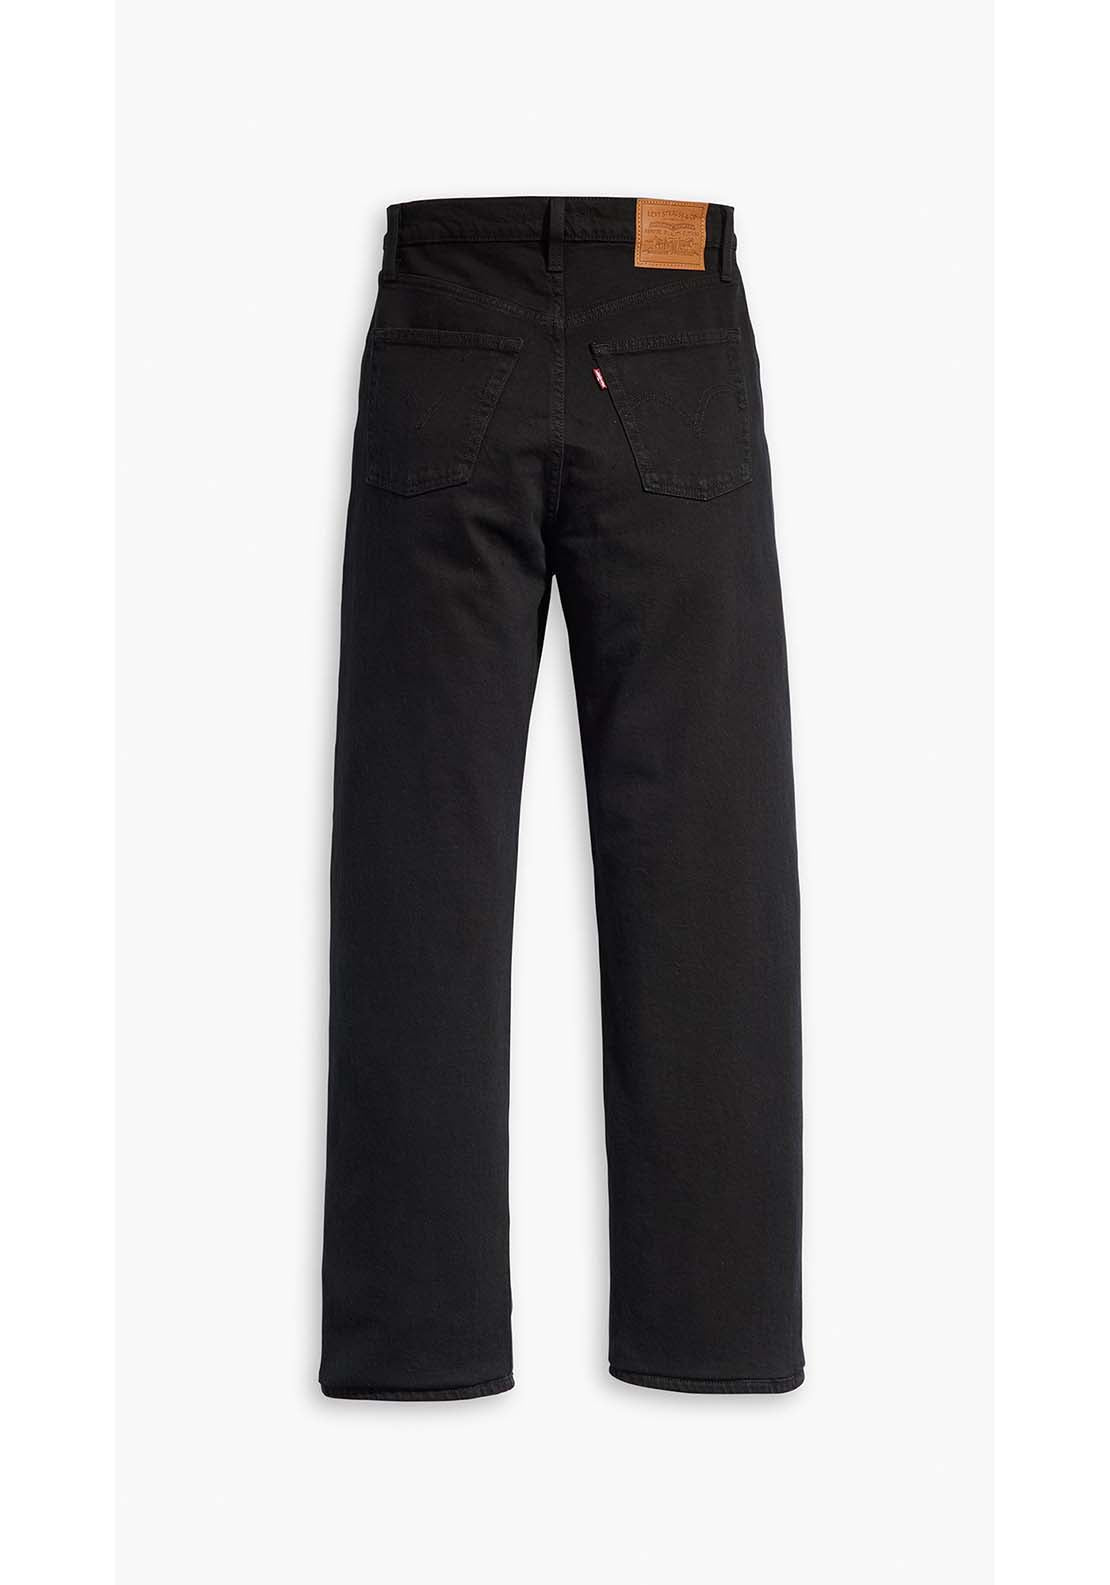 Levis Ribcage Straight Ankle Jean 7 Shaws Department Stores